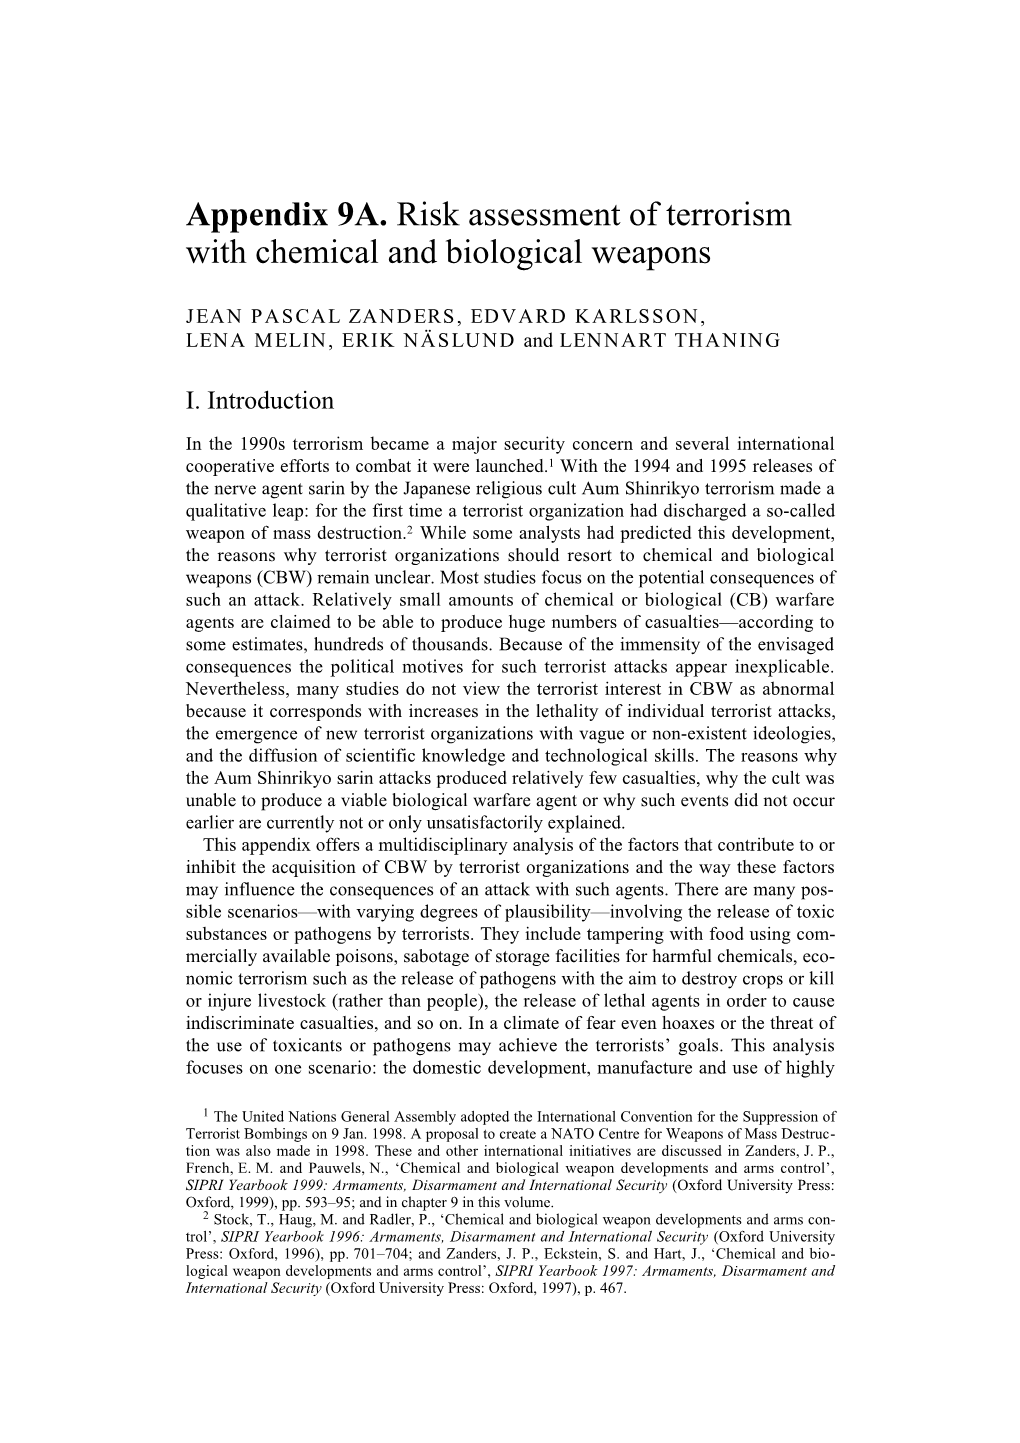 Risk Assessment of Terrorism with Chemical and Biological Weapons